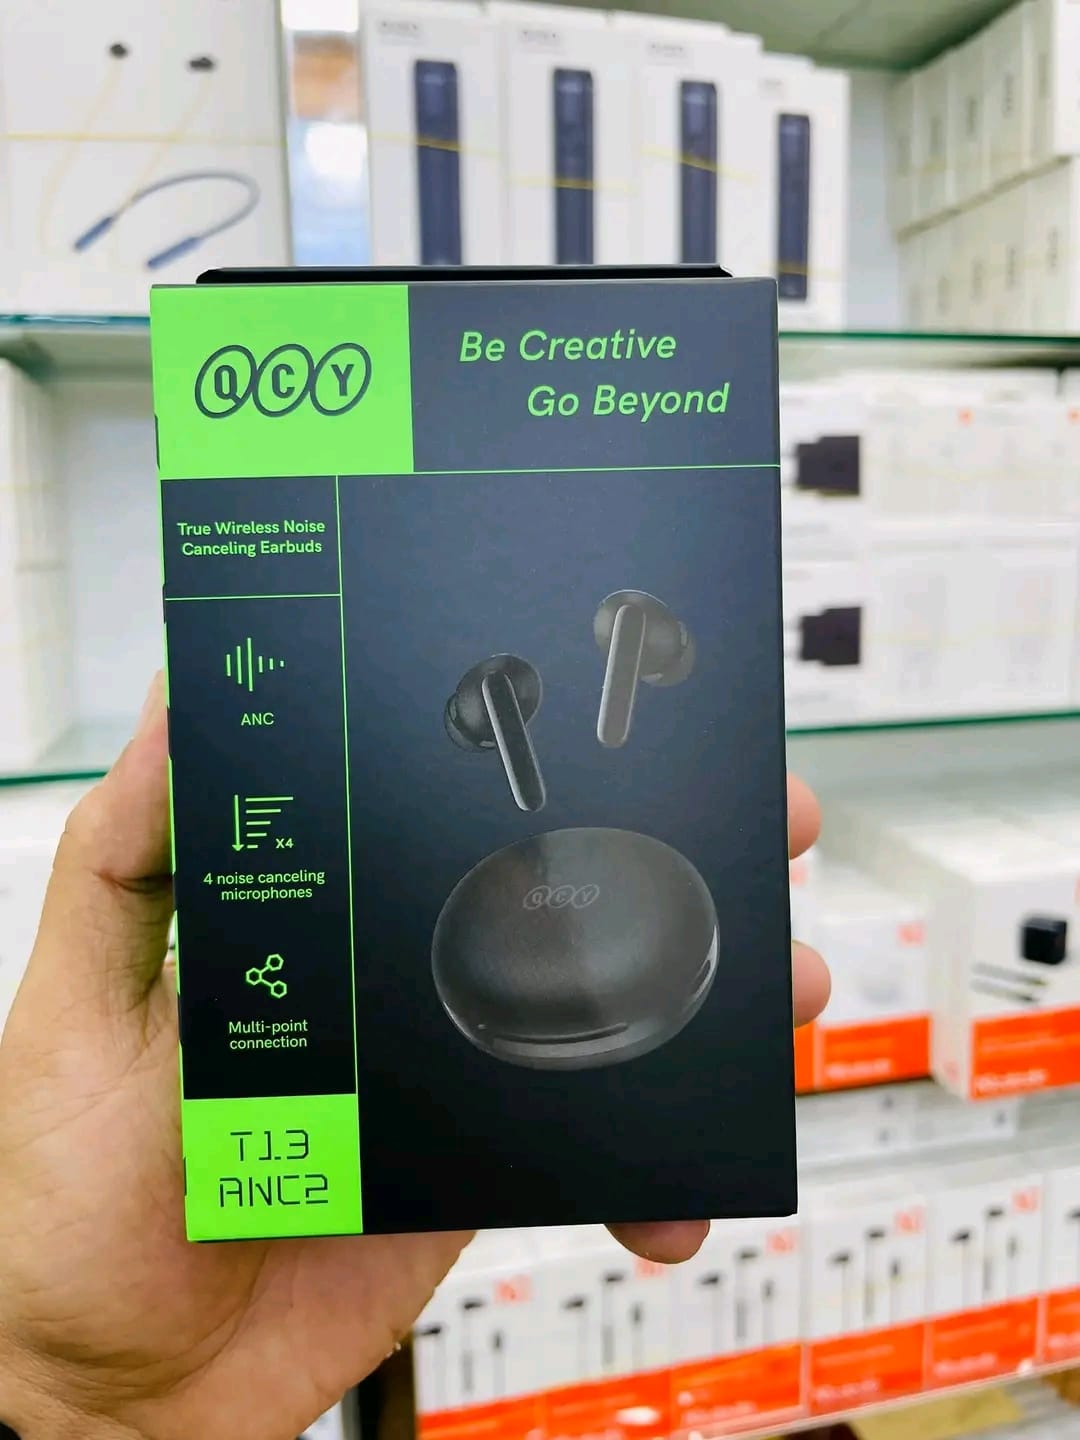 QCY T13 ANC 2 Truly Wireless ANC Earbuds (V2) - Best Price